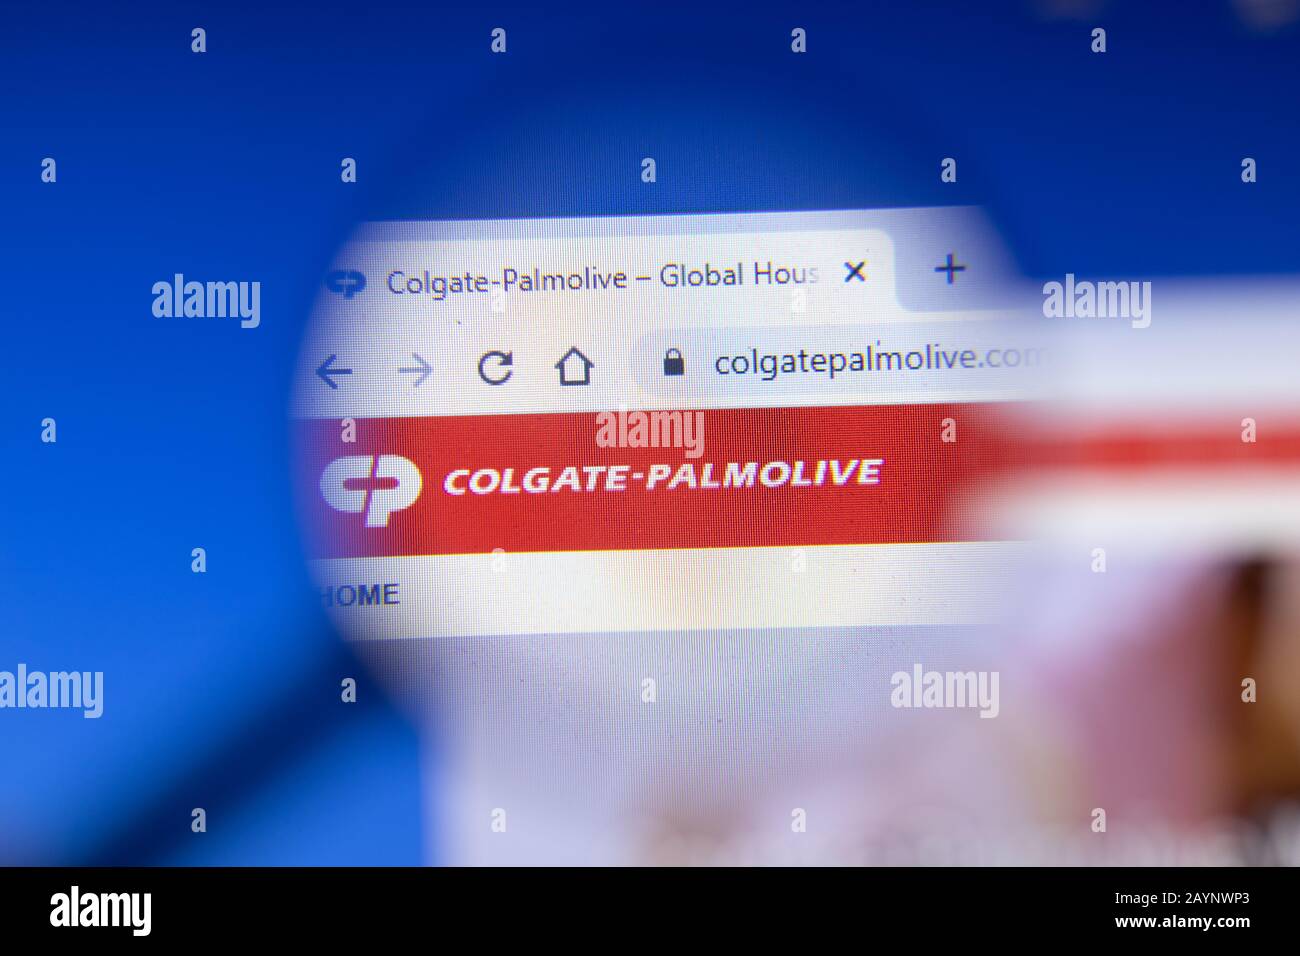 Saint-Petersburg, Russia - 18 February 2020: Colgate-Palmolive Company company website page logo on laptop display. Screen with icon, Illustrative Stock Photo